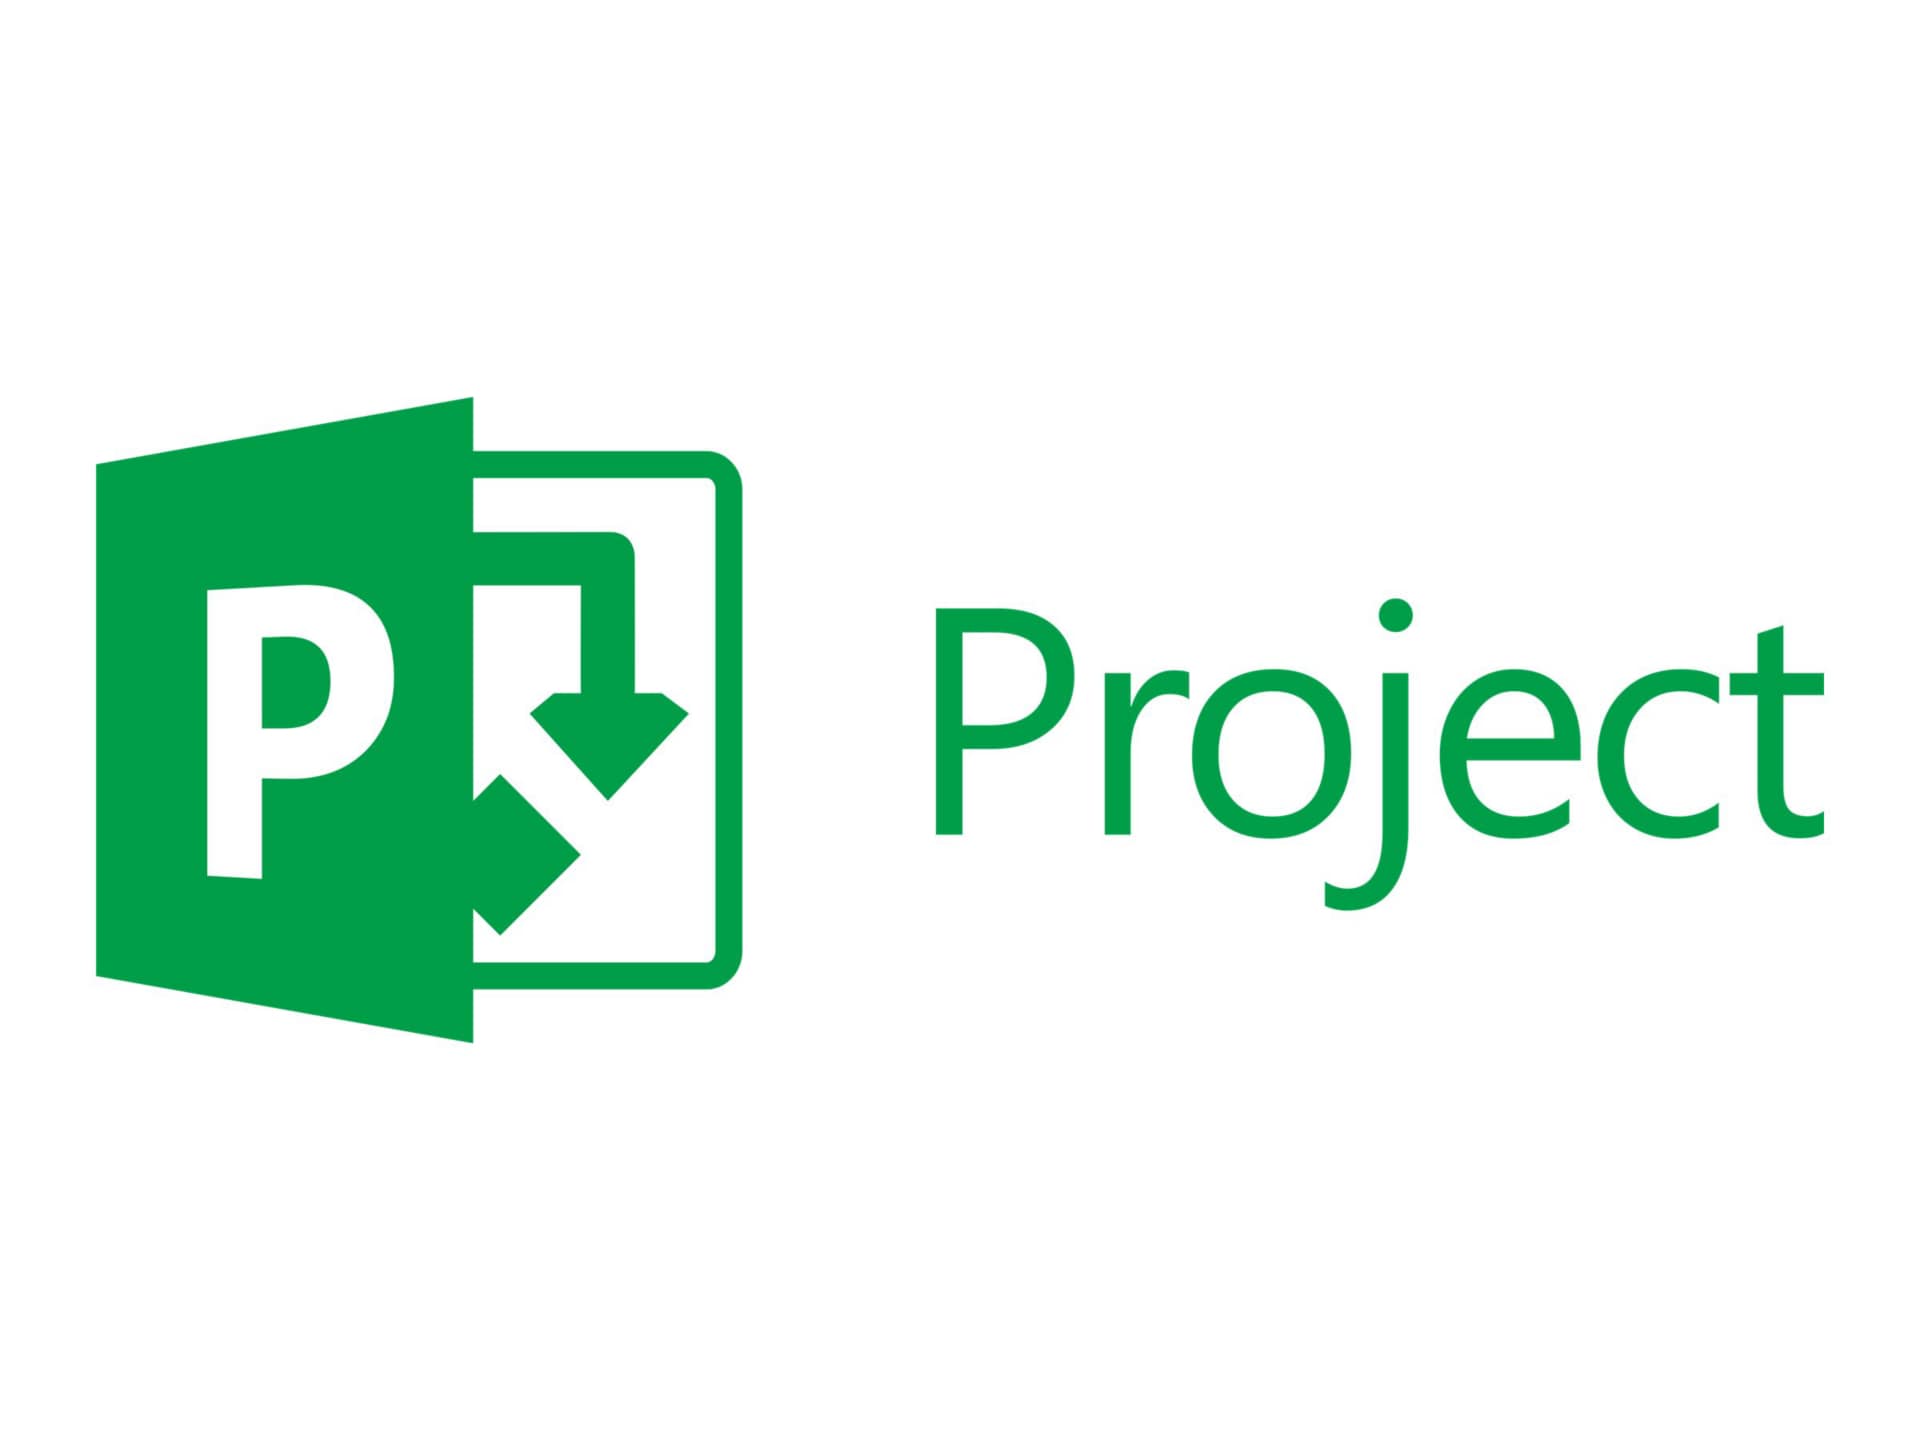 Microsoft Project Online Essentials - subscription license (1 month) - 1 user